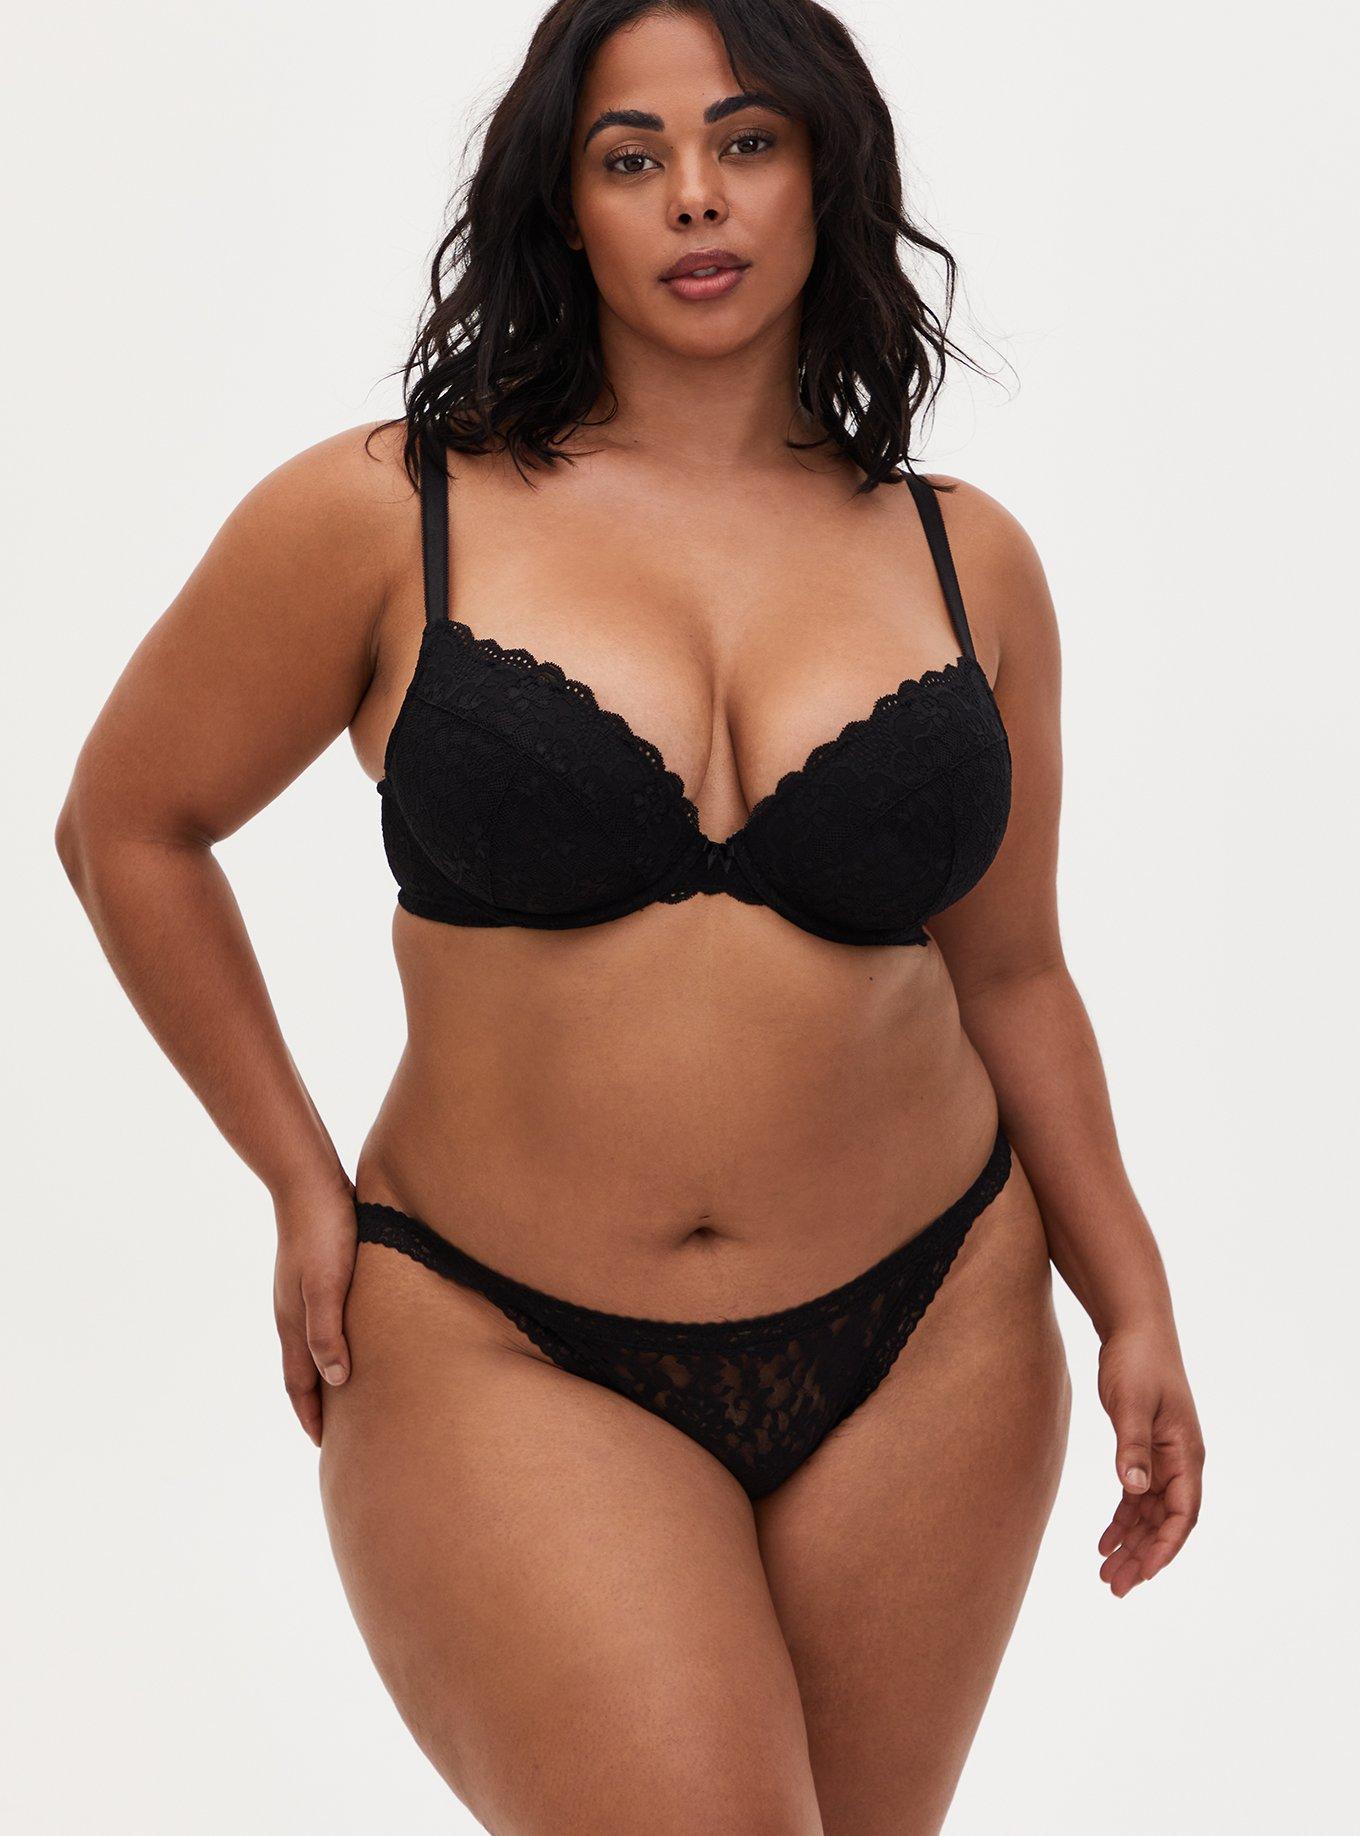 Plus Size Underwired Bralette And High Leg Panty Lingerie Se